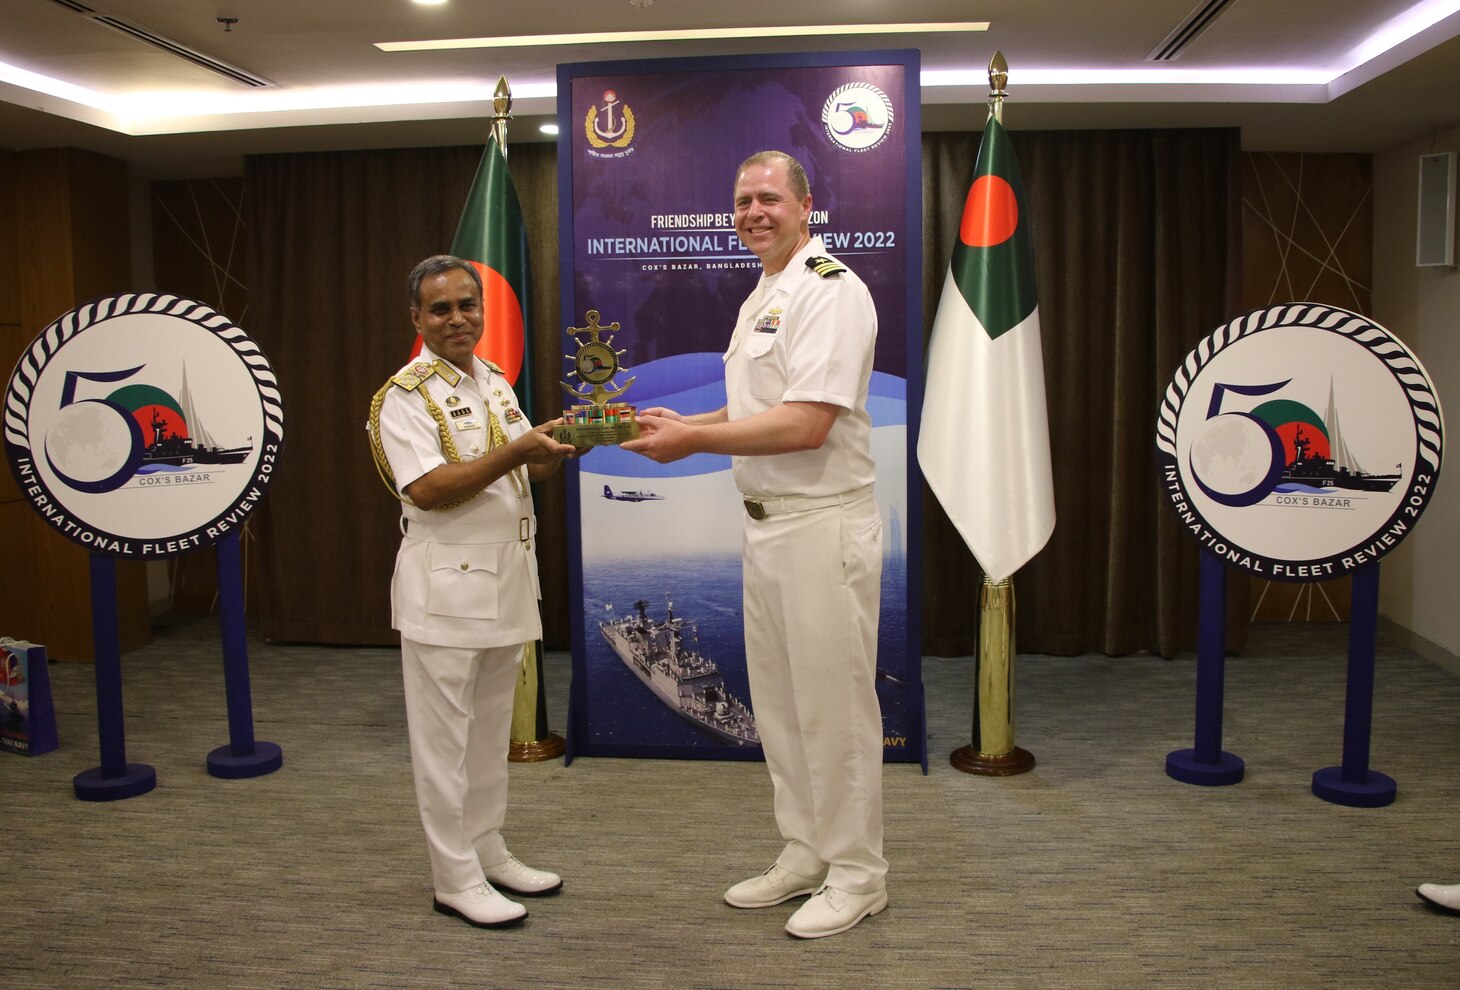 COX’S BAZAR, Bangladesh (Dec. 6, 2022) – Bangladesh Chief of Naval Staff Adm. M Shaheen Iqbal and Cmdr. Derek Jaskowiak, commanding officer of the Independence-variant littoral combat ship USS Oakland (LCS 24), exchange gifts during the International Fleet Review (IFR) 2022 reception in Cox’s Bazar, Bangladesh, Dec. 6. Oakland is participating in IFR 2022 organized by the Bangladesh Navy, which intends to promote good will, strengthen cooperation and serve as an ideal platform for world’s navies to showcase their prowess, naval diplomacy, and cooperation in a global arena. (U.S. Navy courtesy photo)